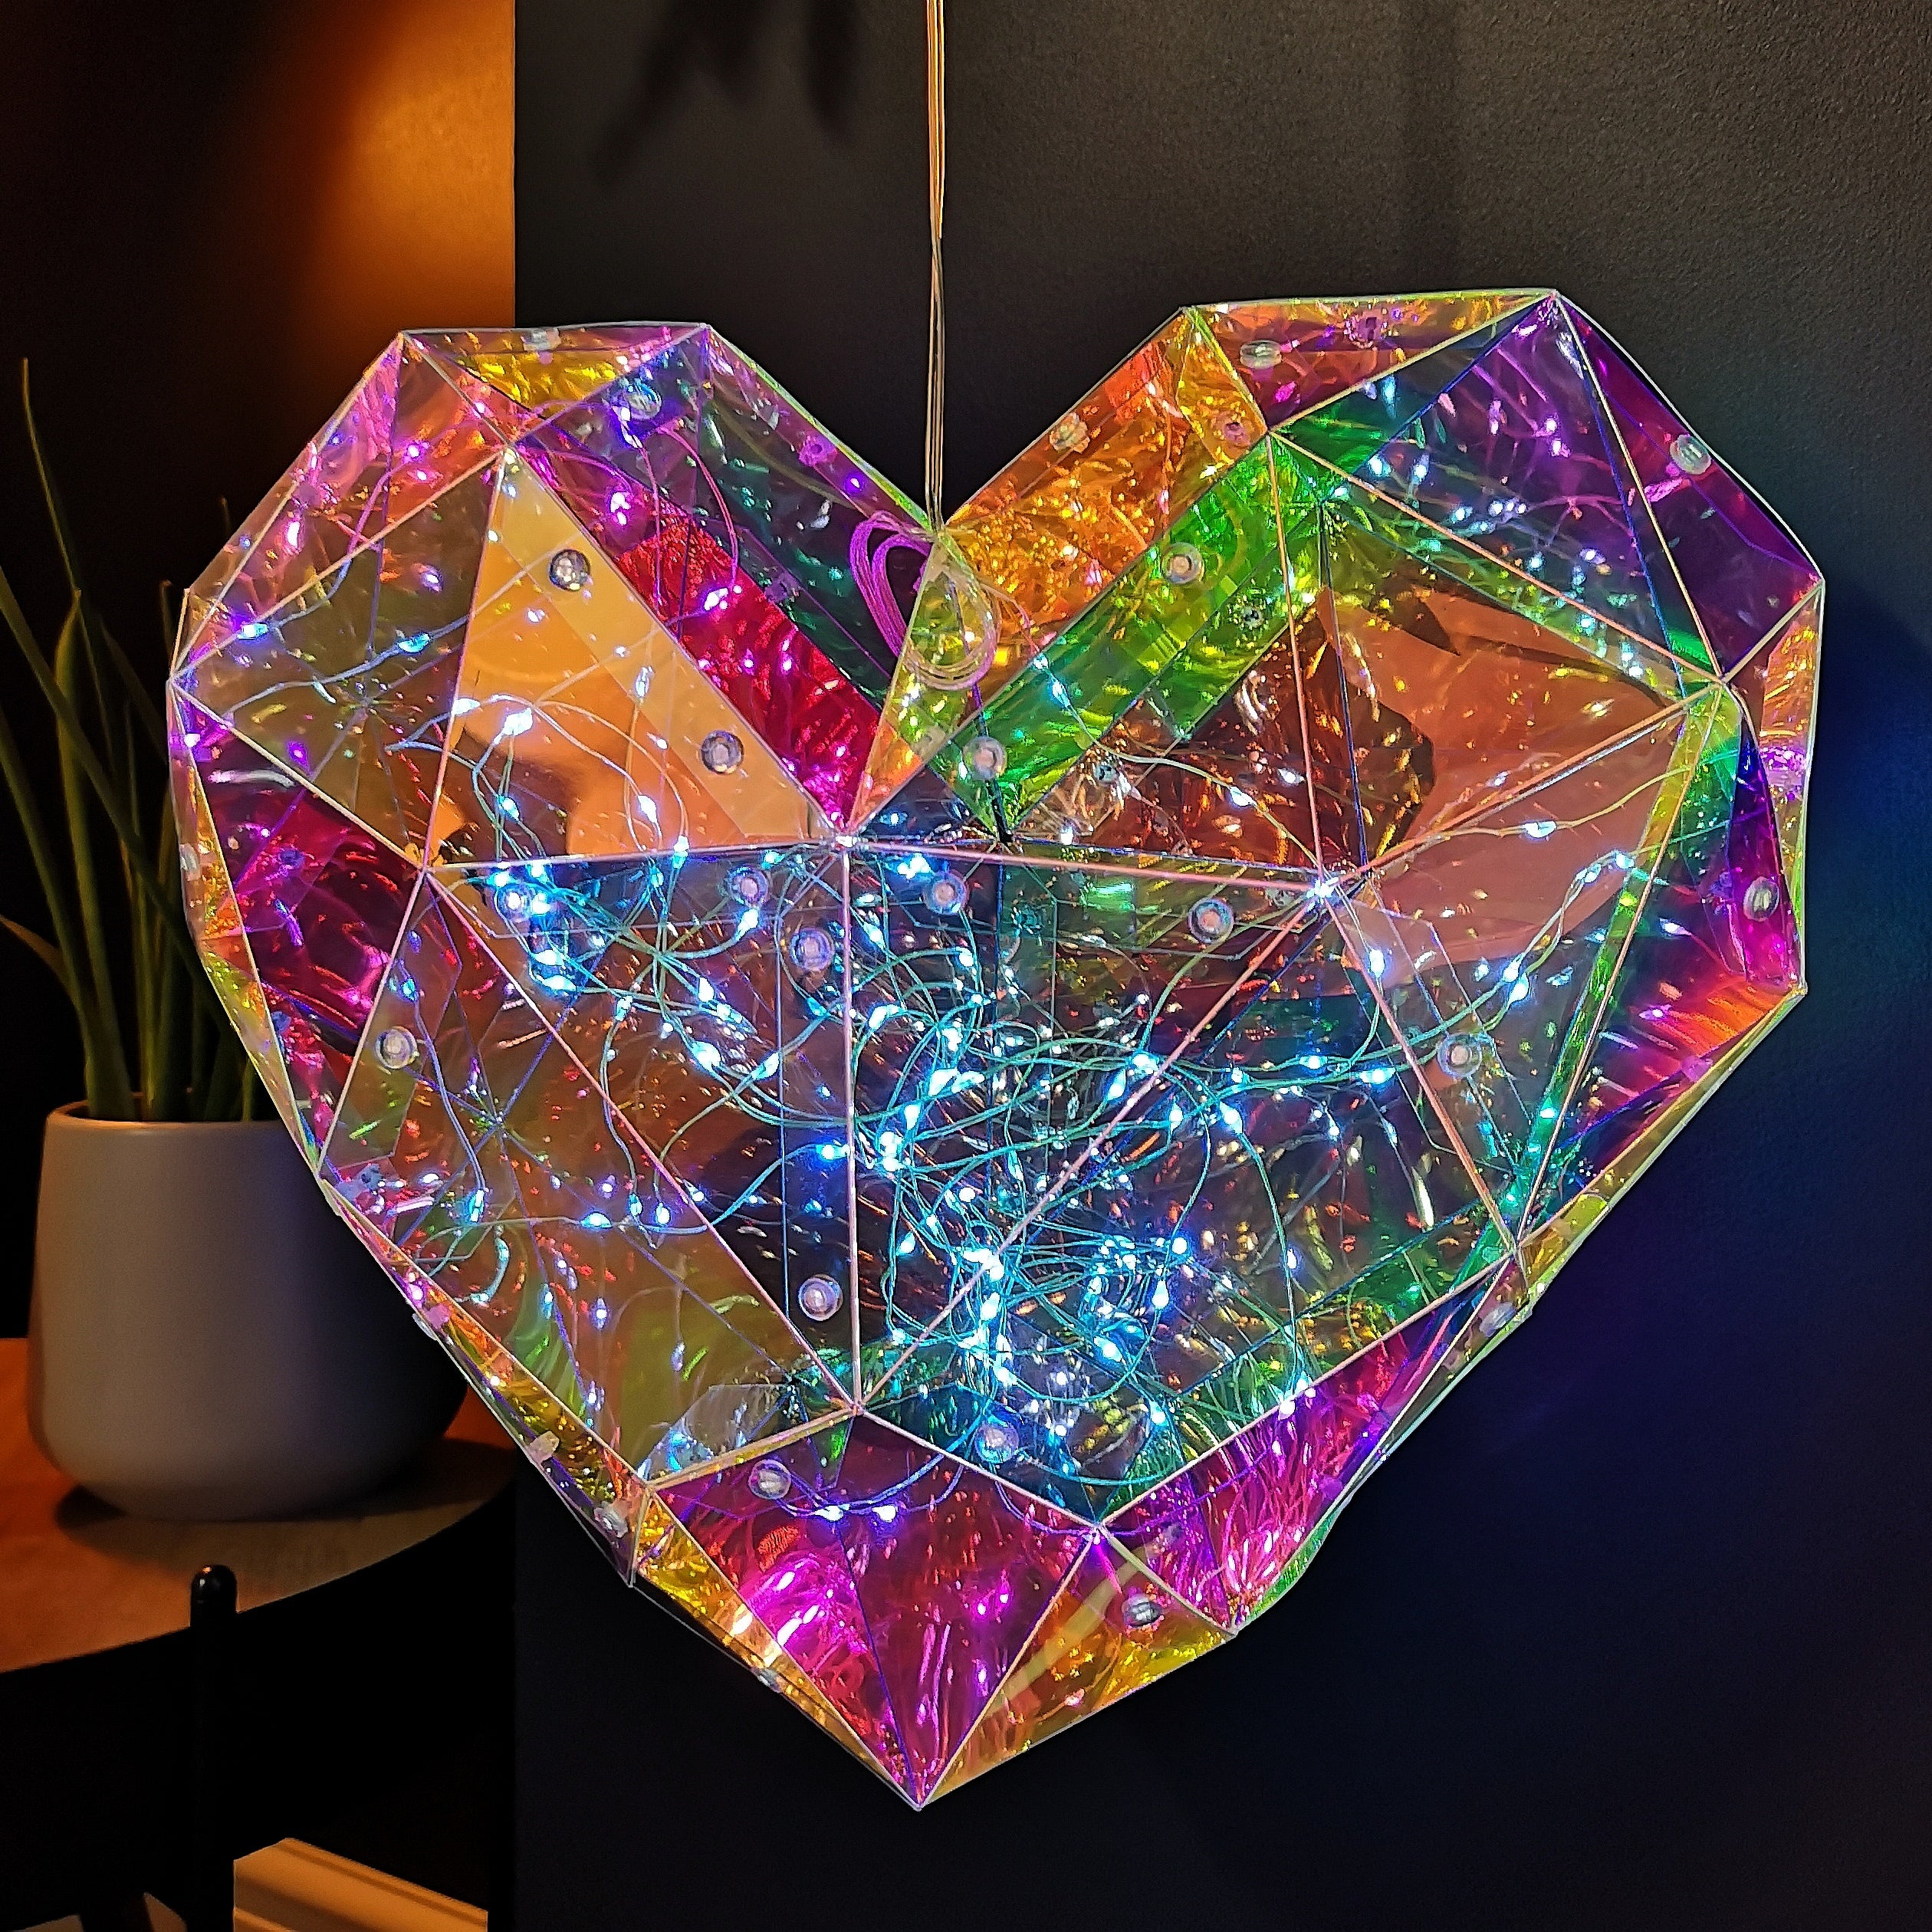 30cm Battery Operated Light up Hanging Christmas Dreamlight Heart with 100 White LEDs